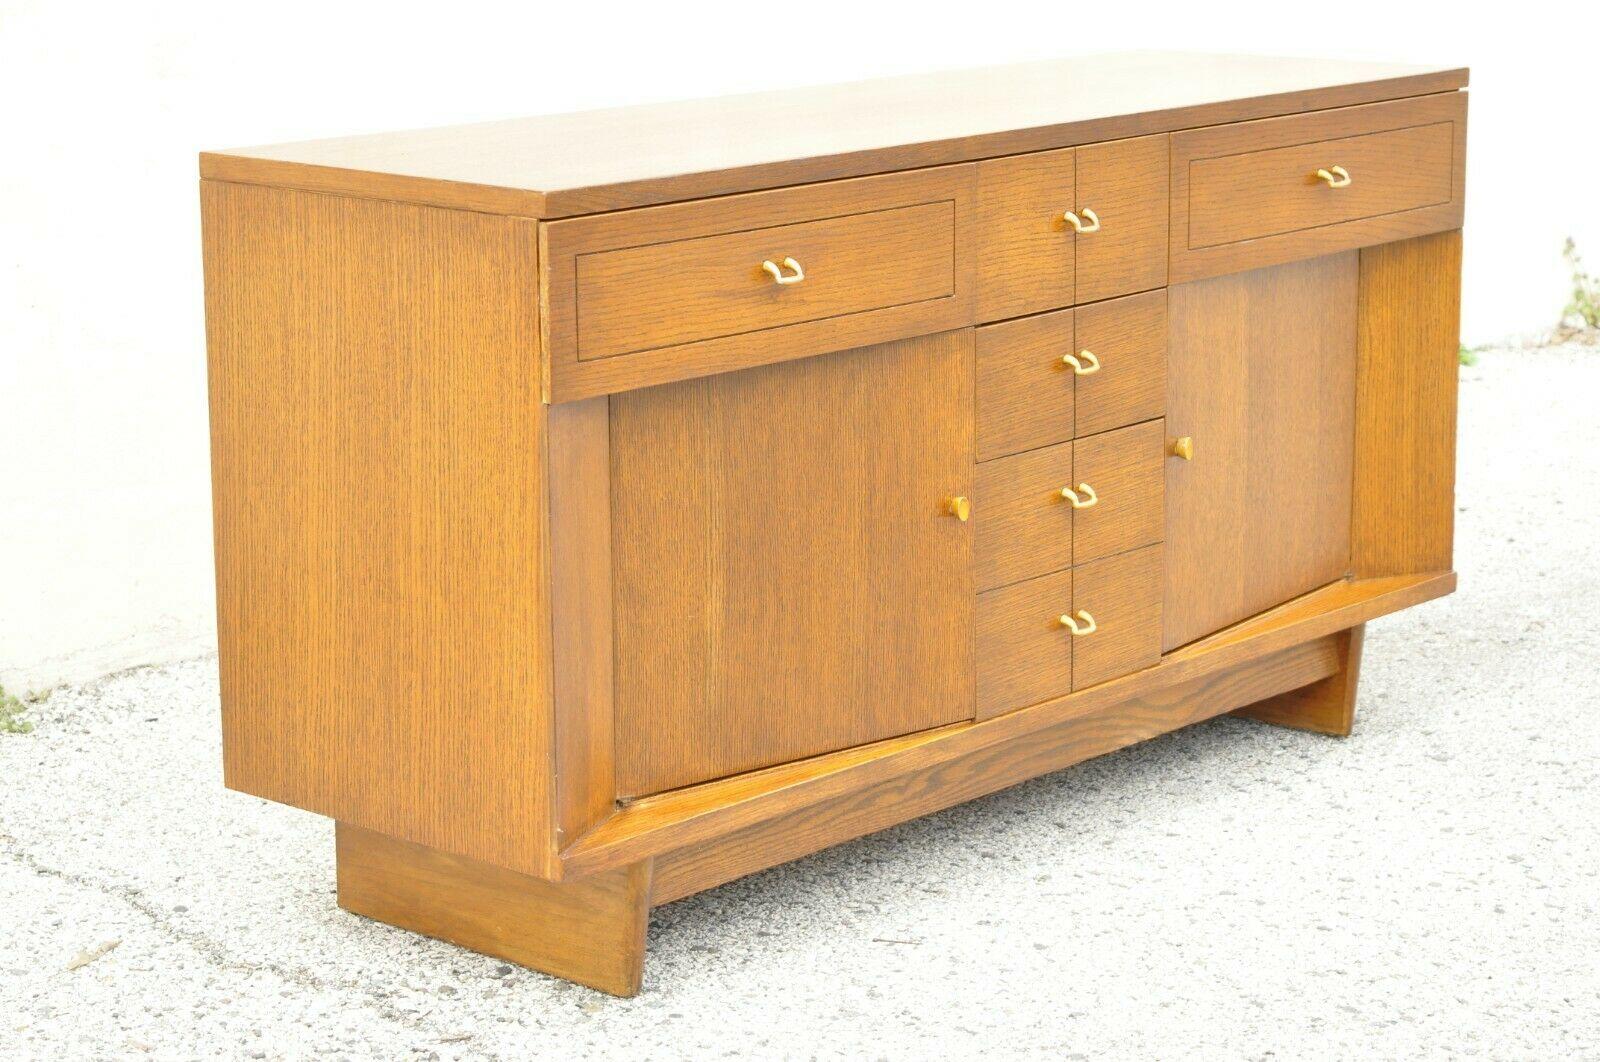 Raymond Loewy Mengel Mid Century Modern Sculpted Oak Buffet Credenza. Item features a beautiful wood grain, 2 swing doors, original stamp, 5 drawers, quality American craftsmanship, sleek sculptural form. *Color is a bit more brown indoors. Mid 20th